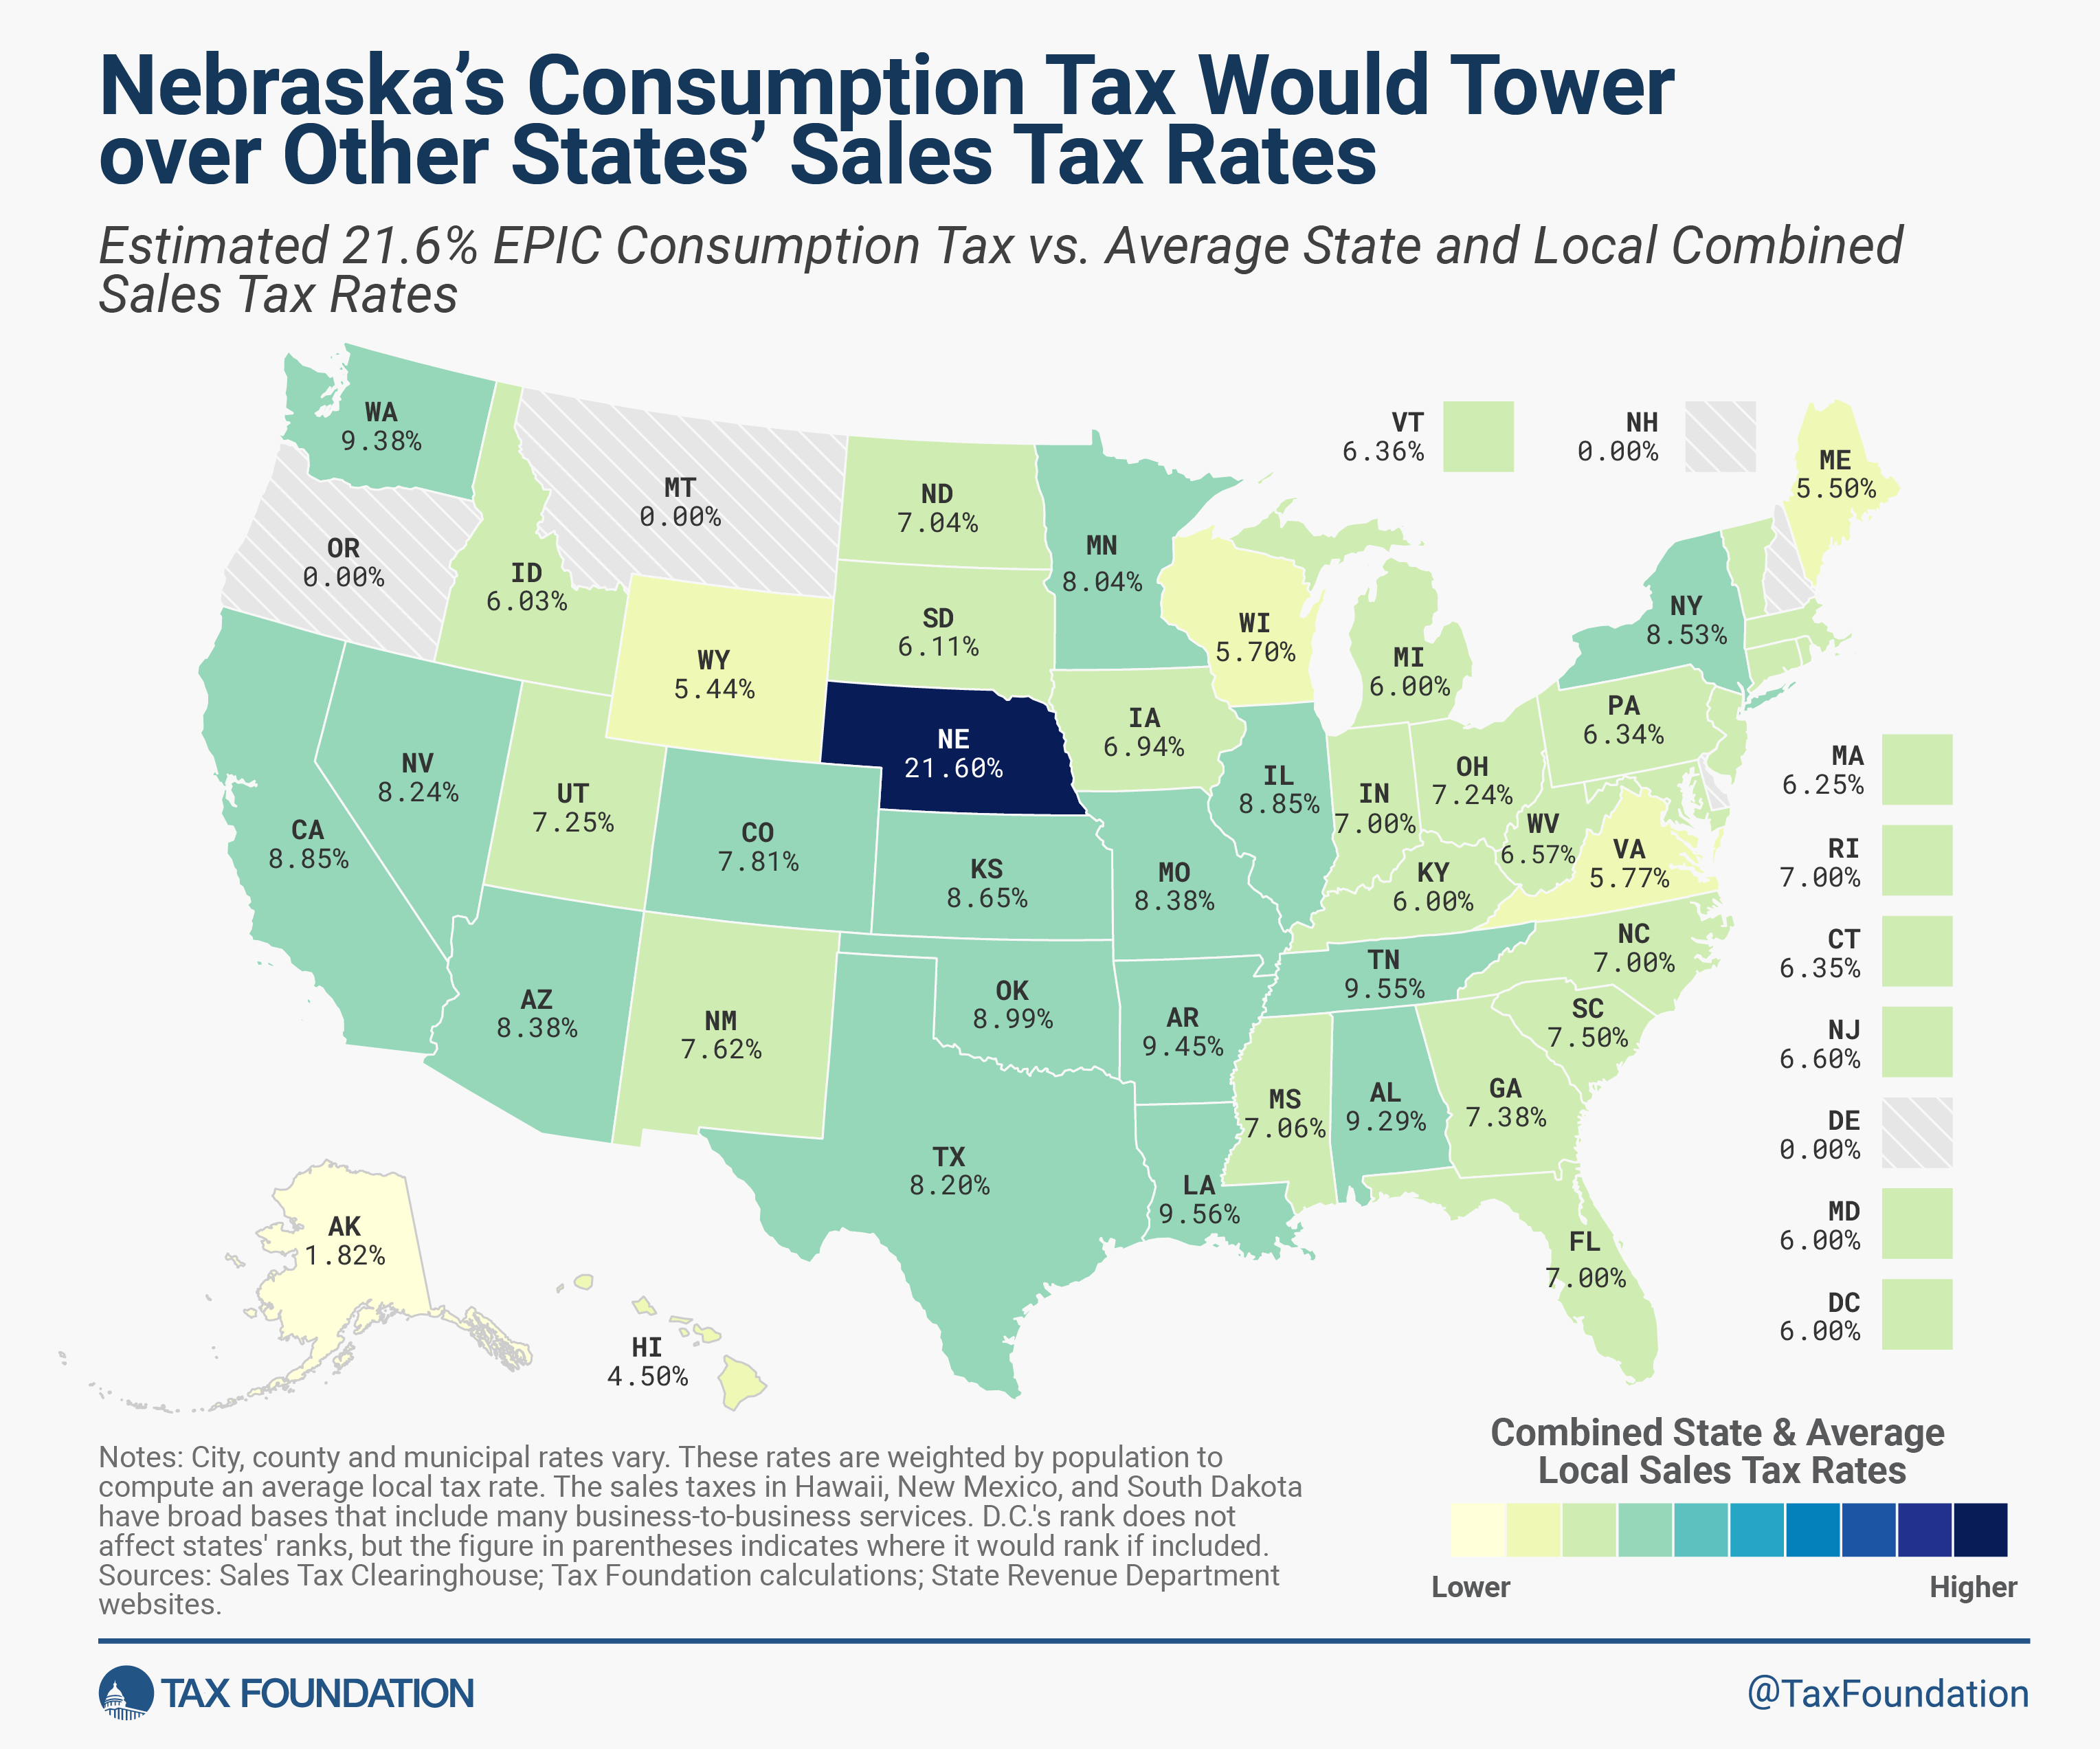 Nebraska EPIC option consumption tax plan rate compared to other state sales tax rates